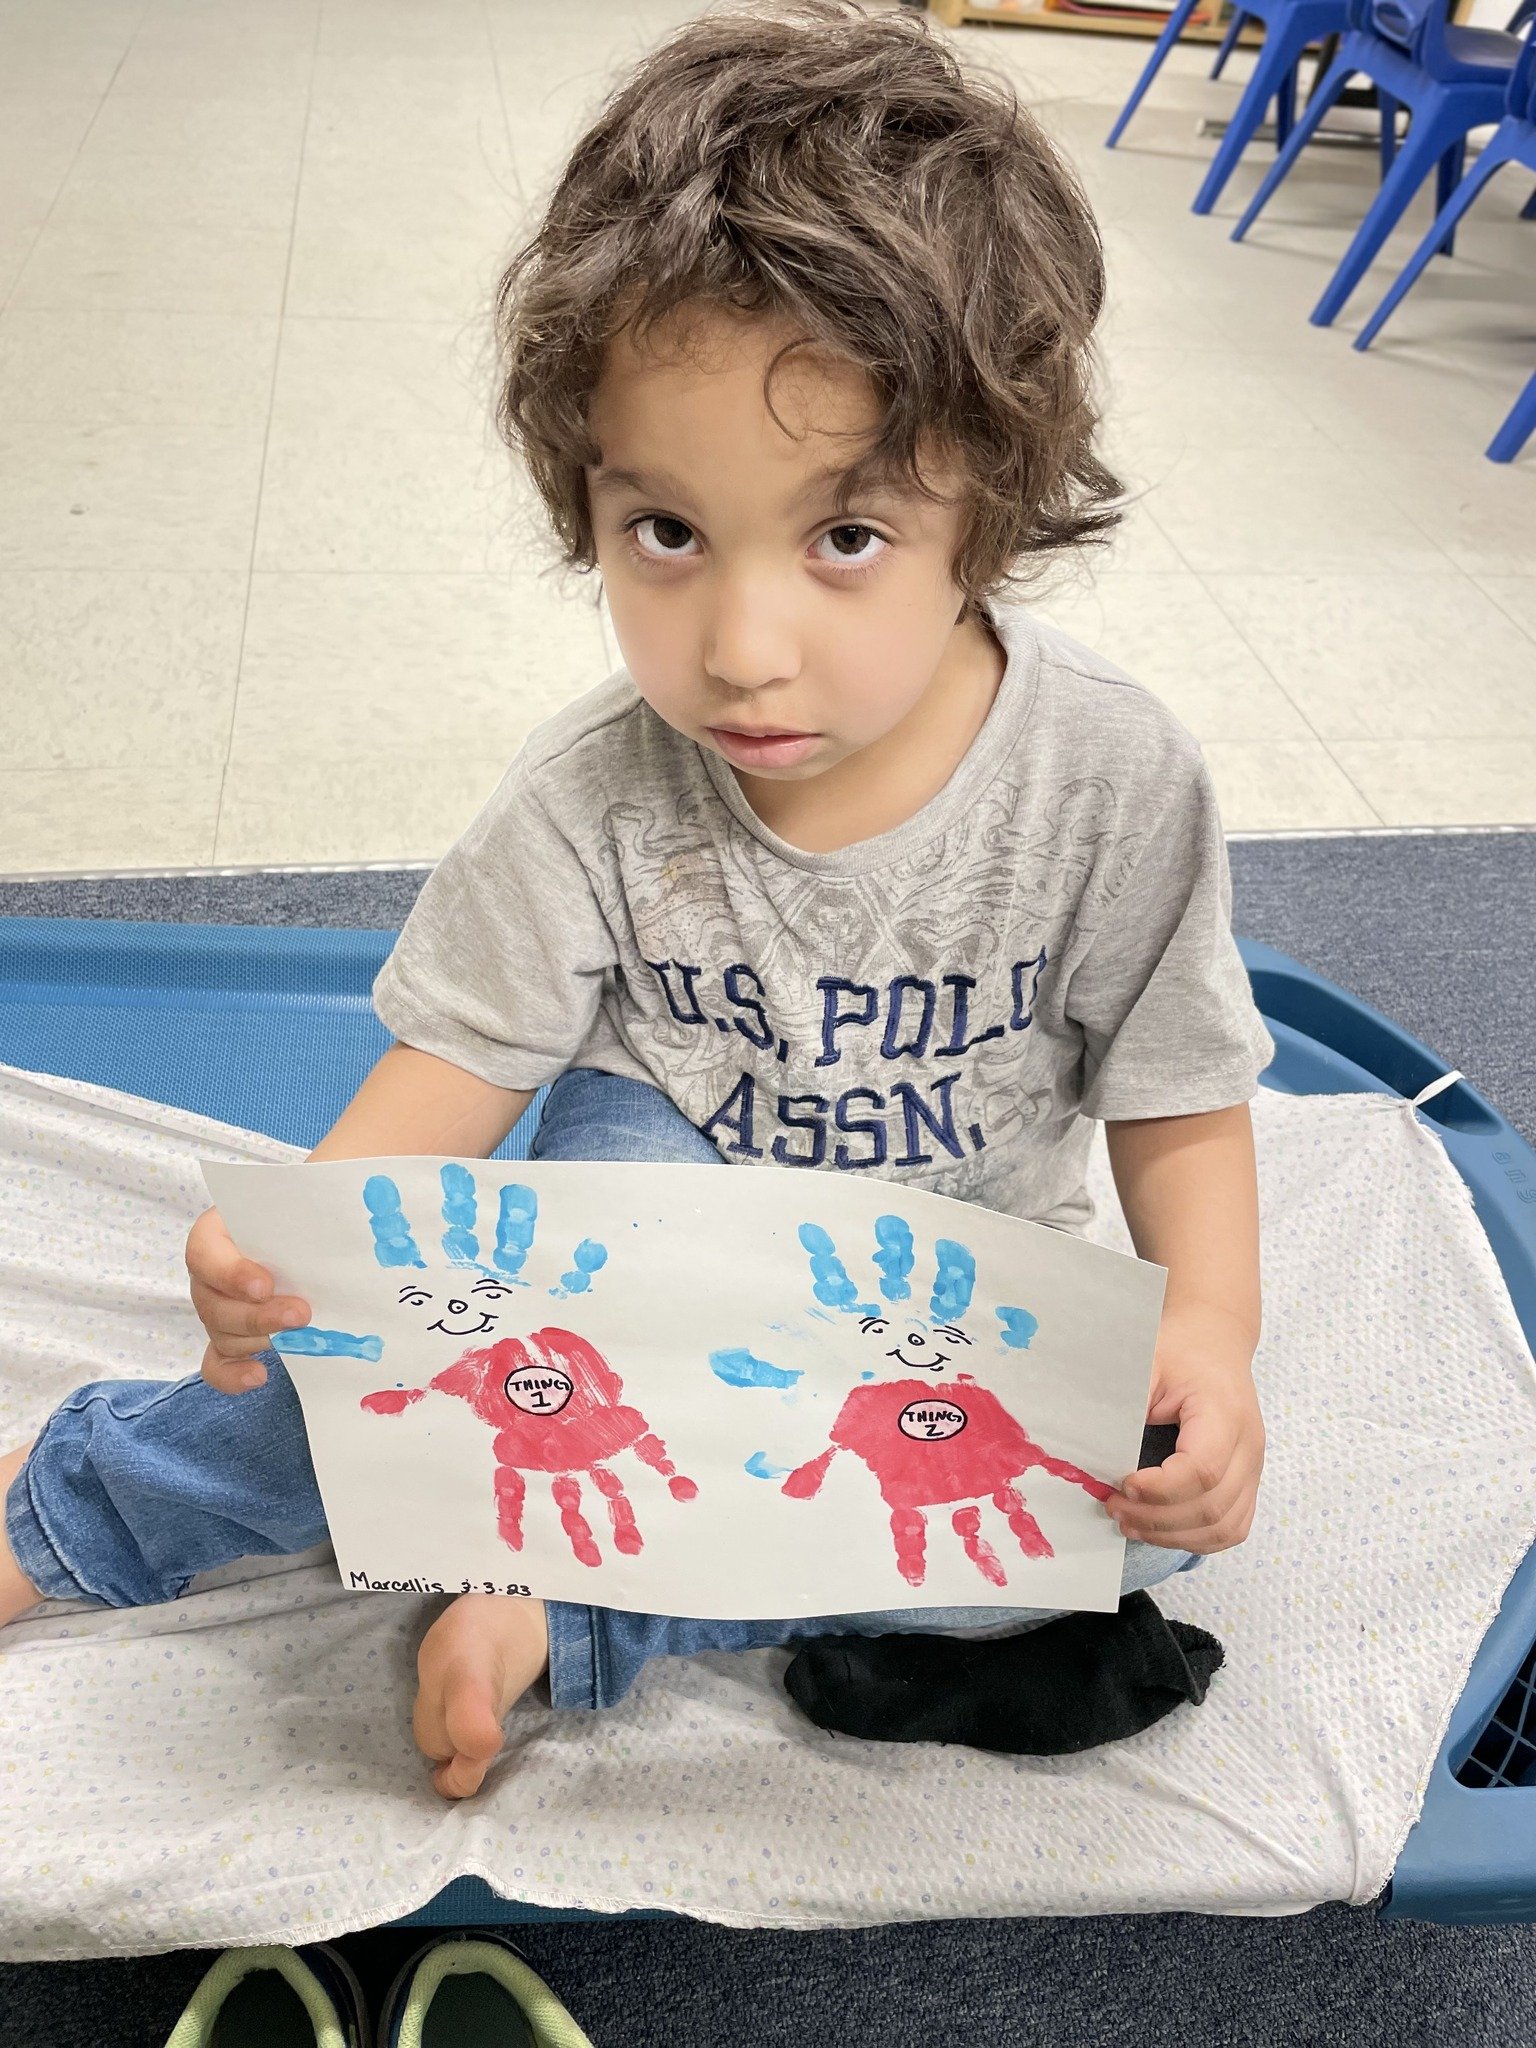  Ms. Centeno reported, "Lincoln 3 year old class Celebrated Dr. Seuss week by hand painting Thing 1 and Thing 2. " 